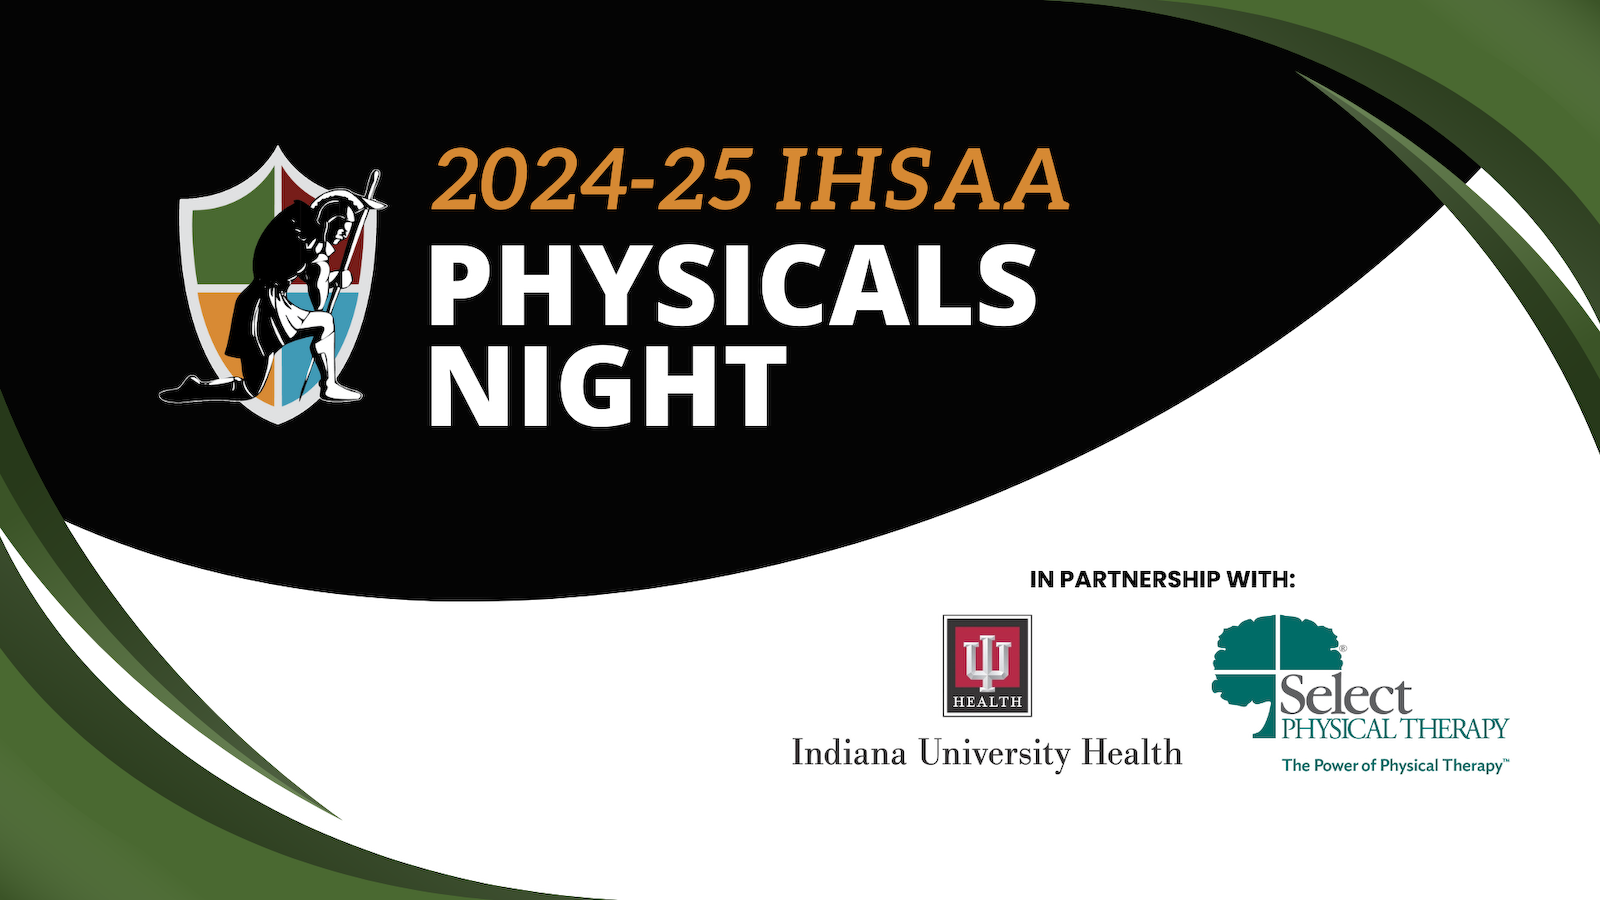 Athletic Physicals Night Flyer (Presentation) (1).png